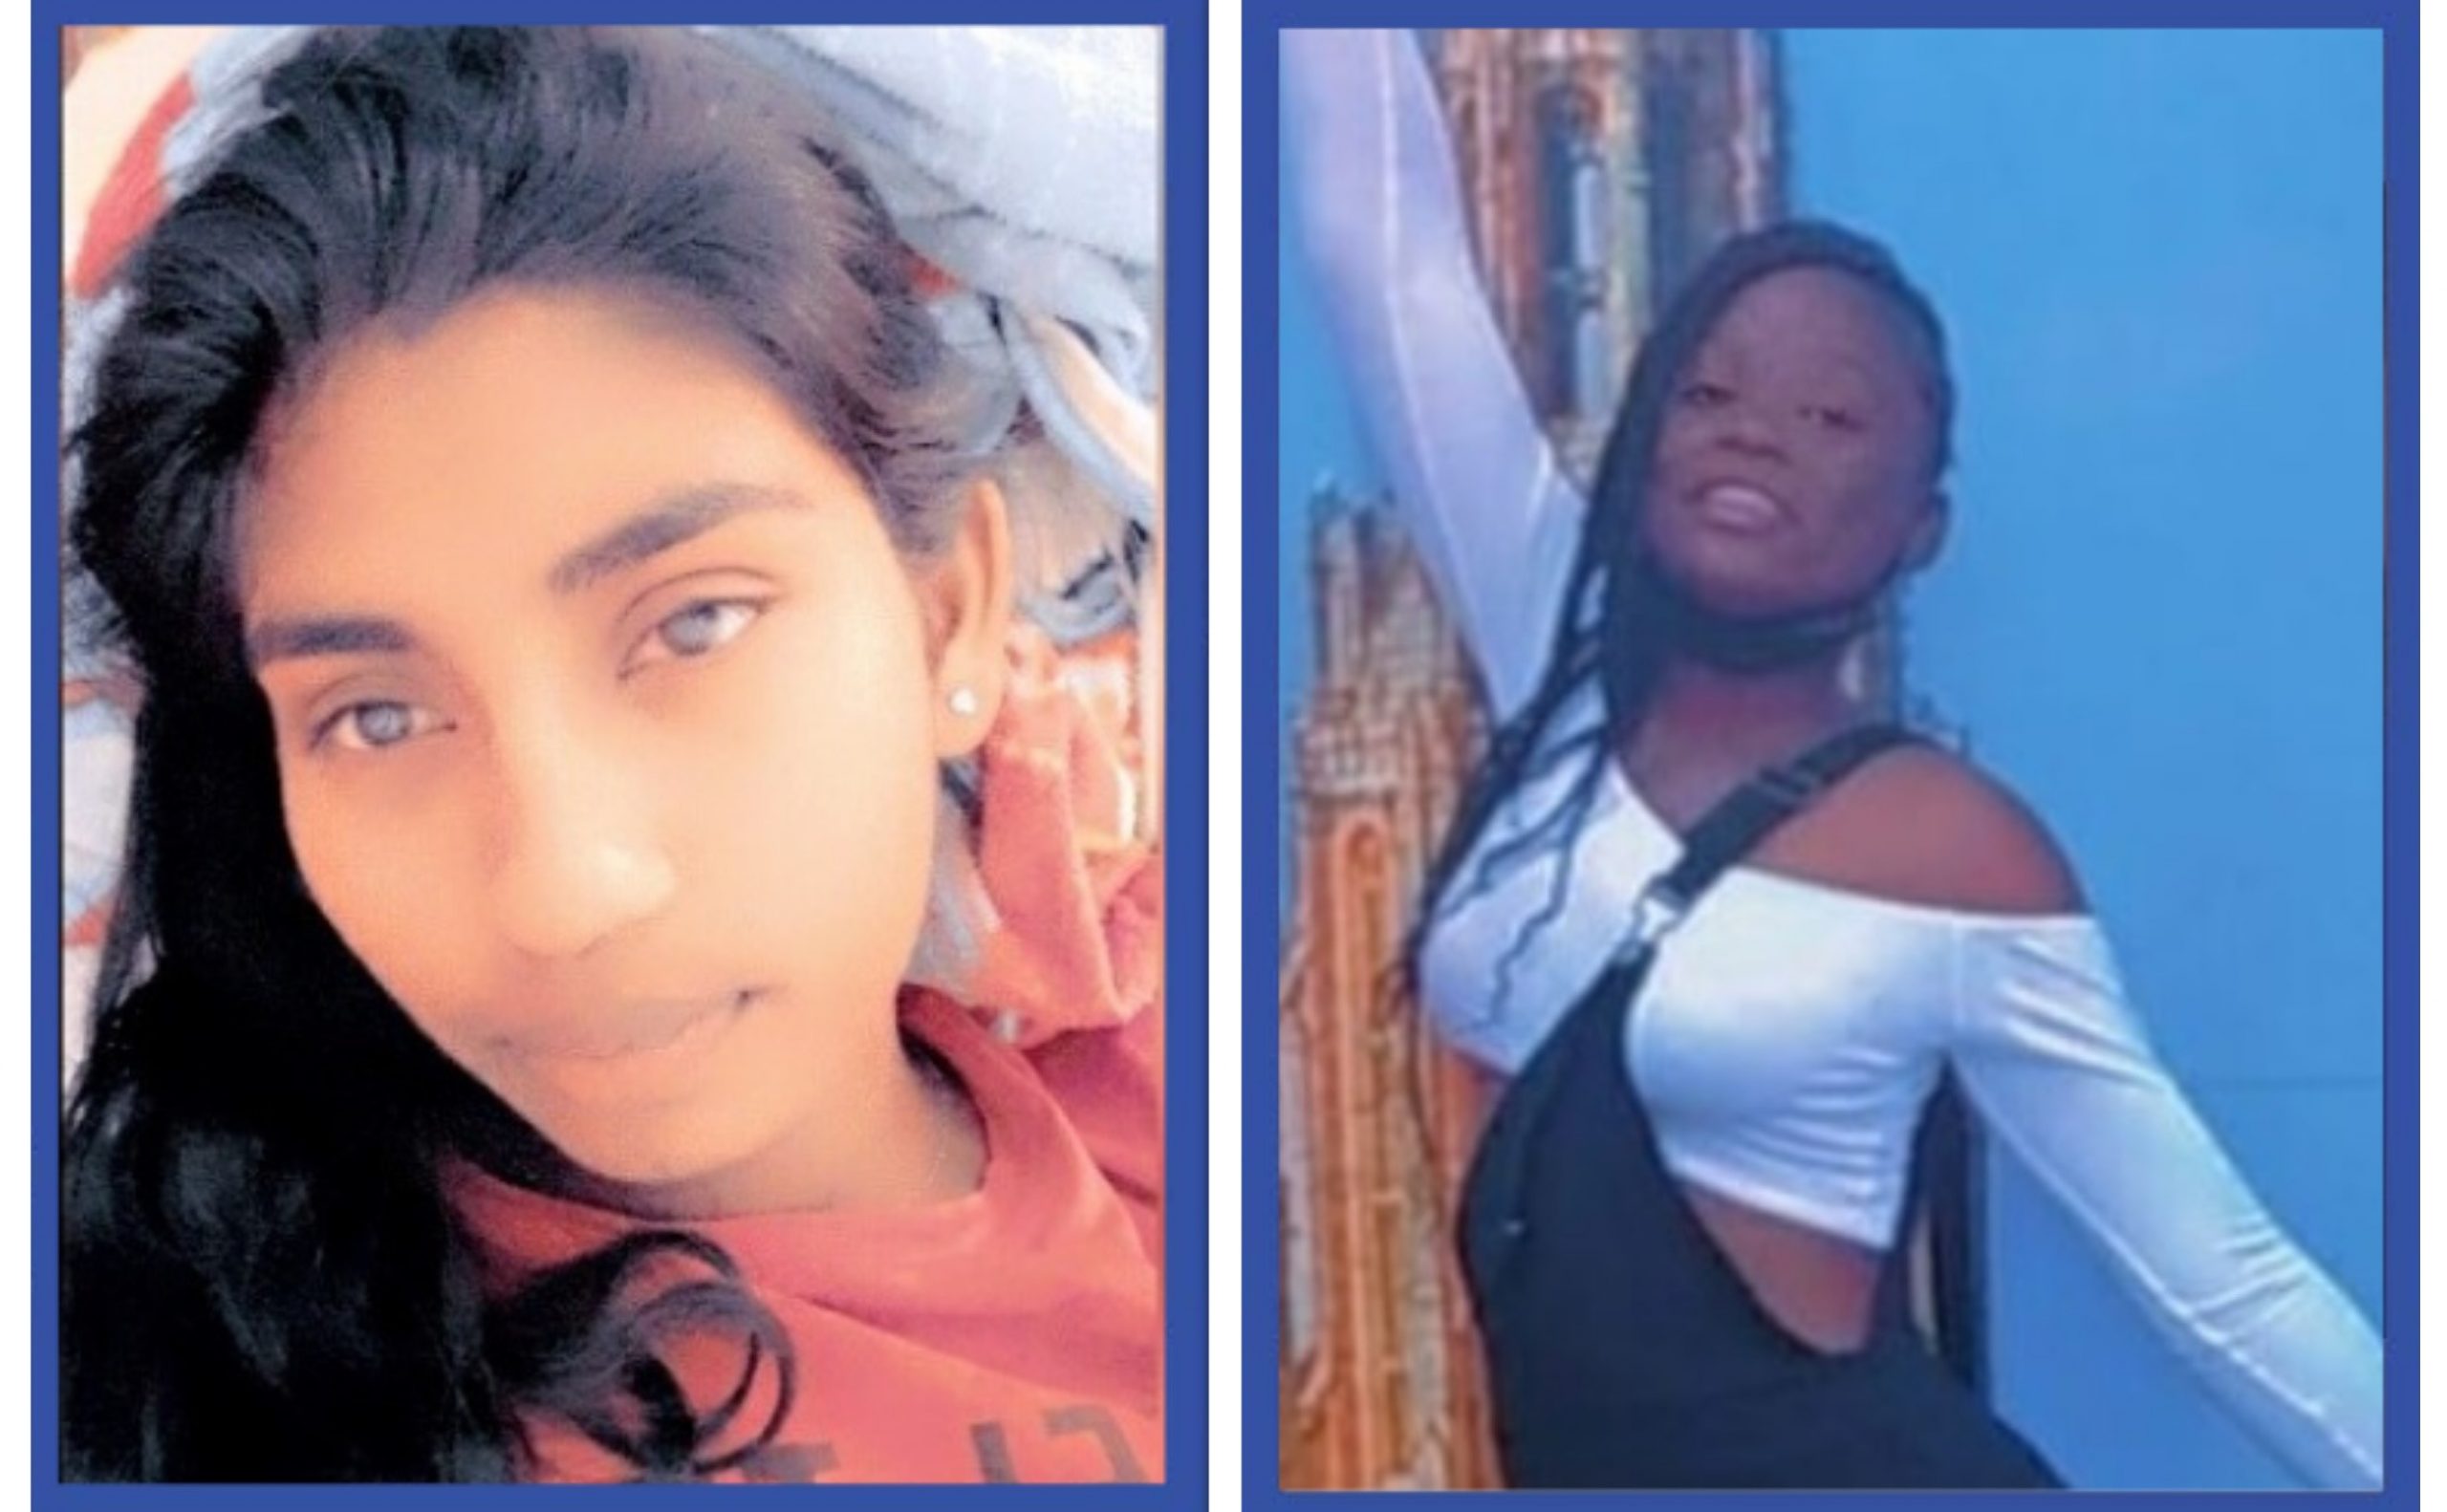 Search on for 2 missing teens